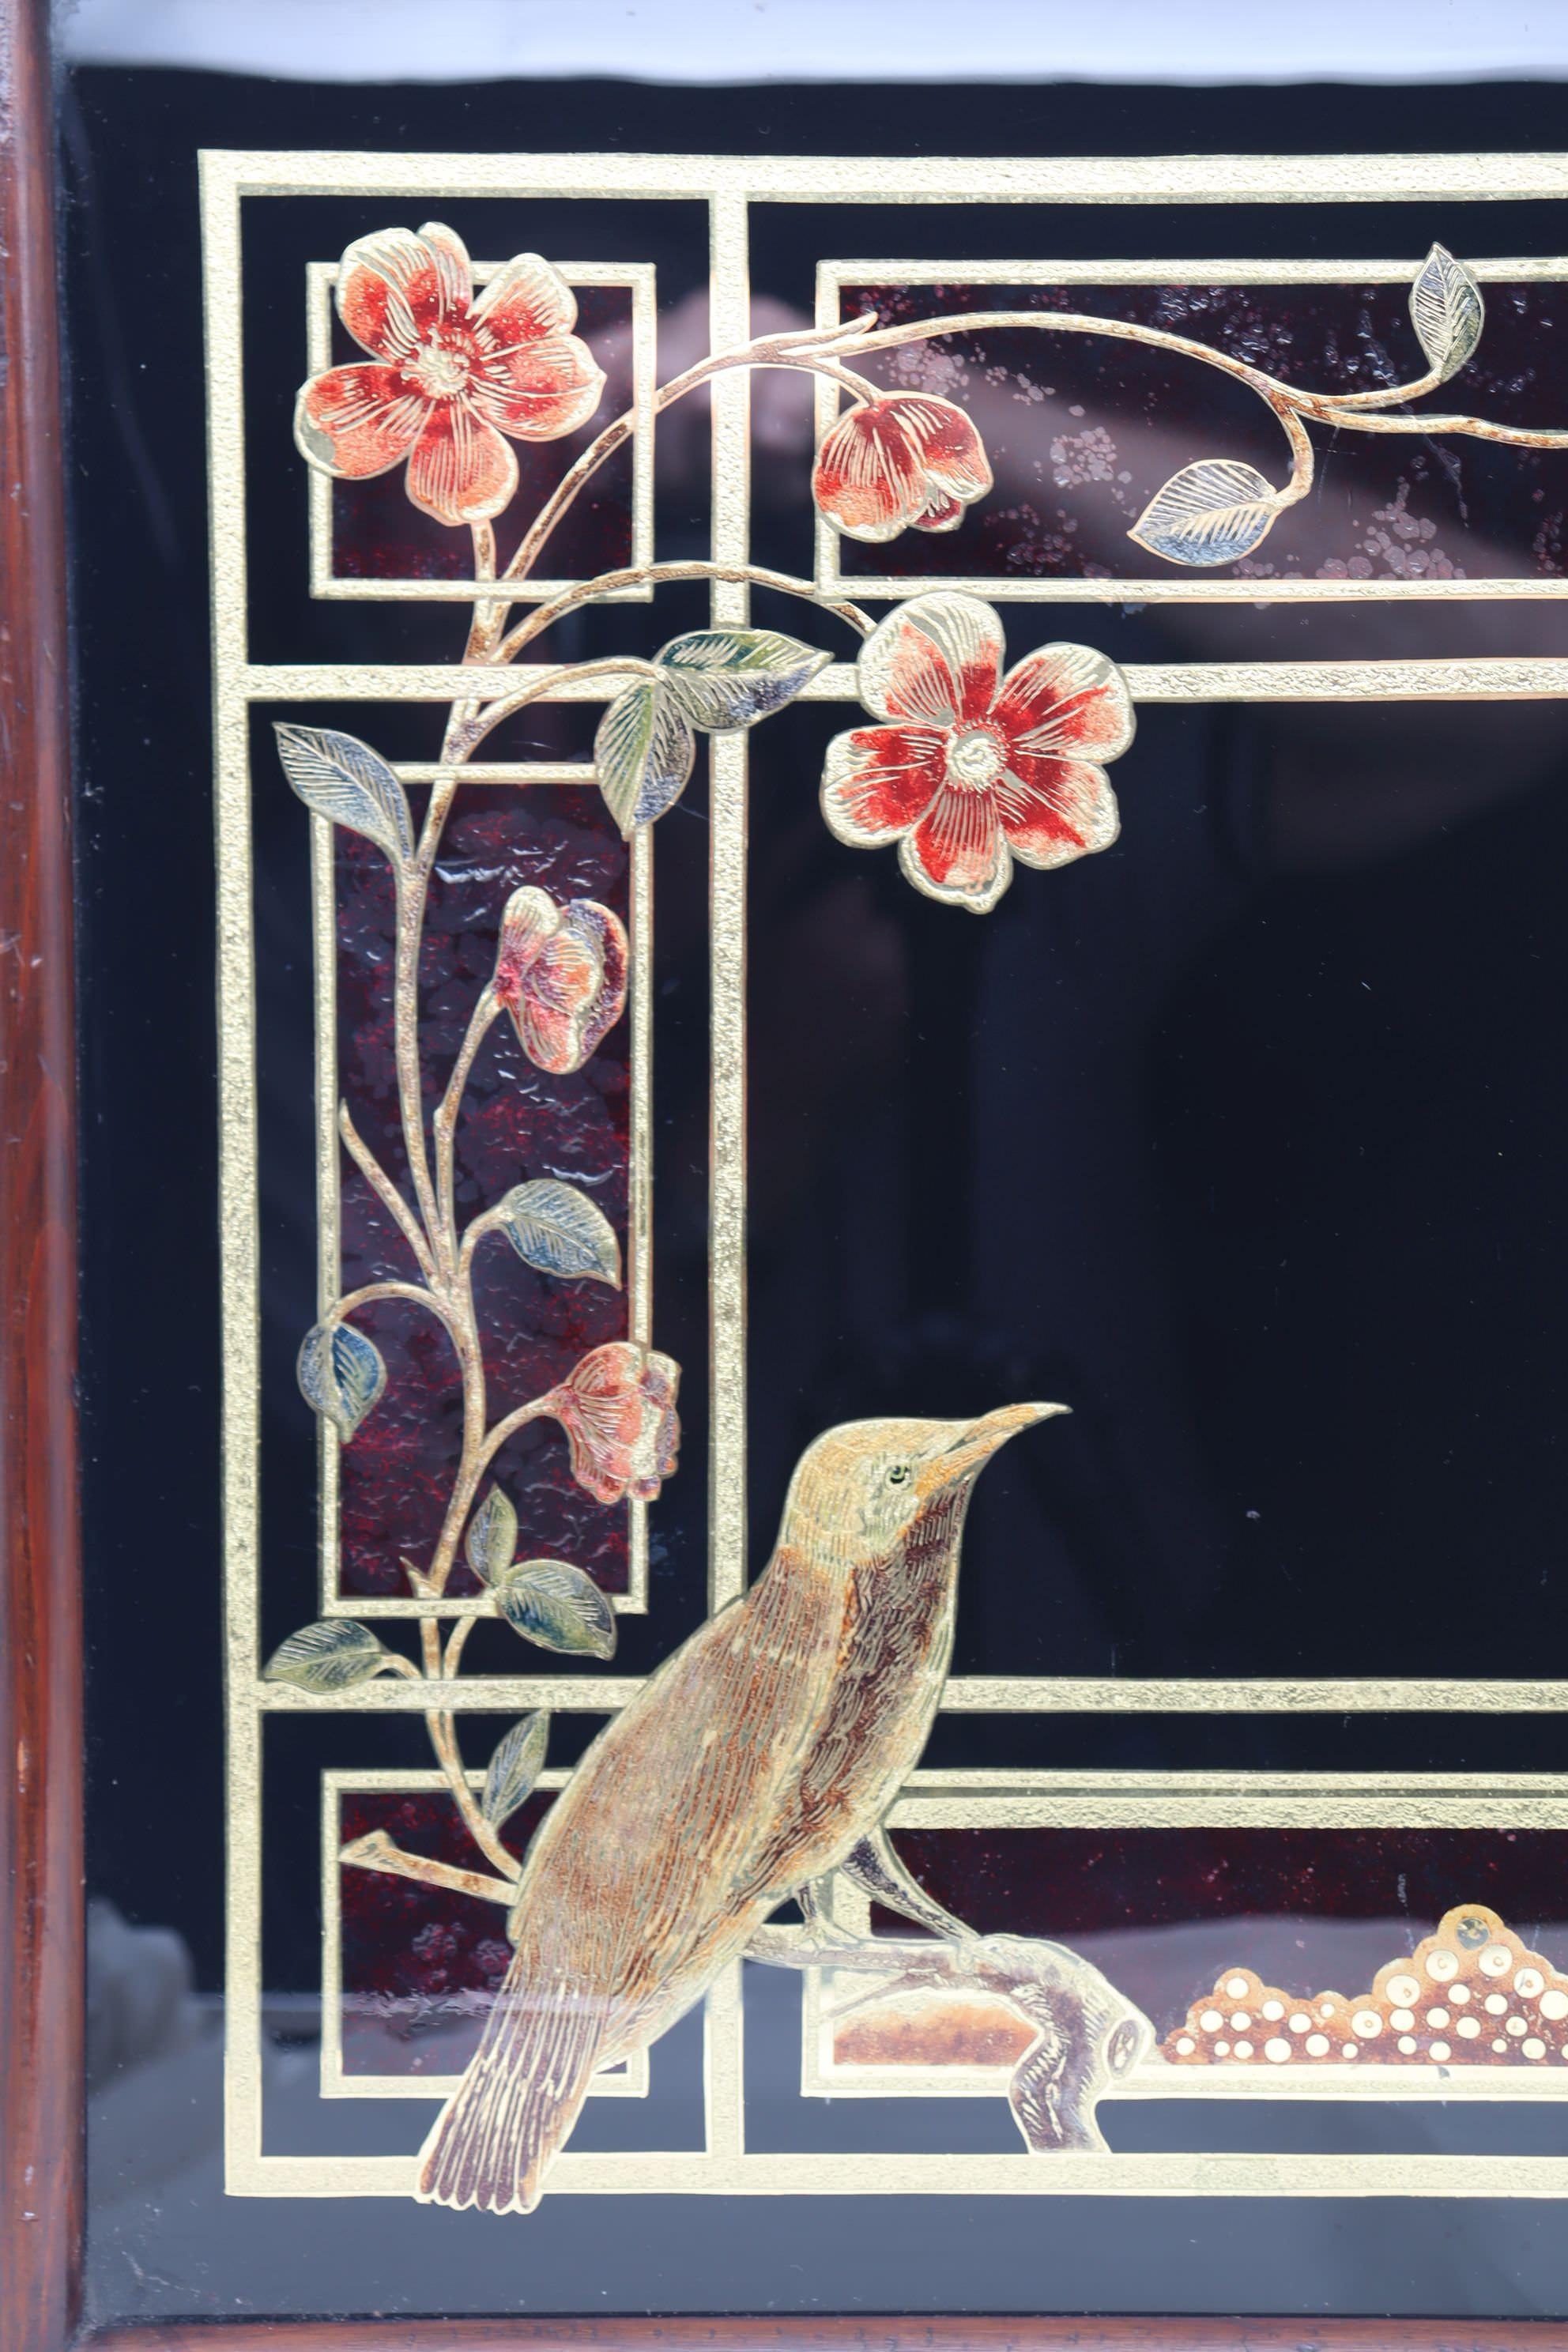 This large Victorian reverse painted glass tray is decorated with a scene of birds, flowers and a butterfly all above a gilded grid on a black ground. The glass has been etched and engraved on the back, then painted and gilded and mounted in a